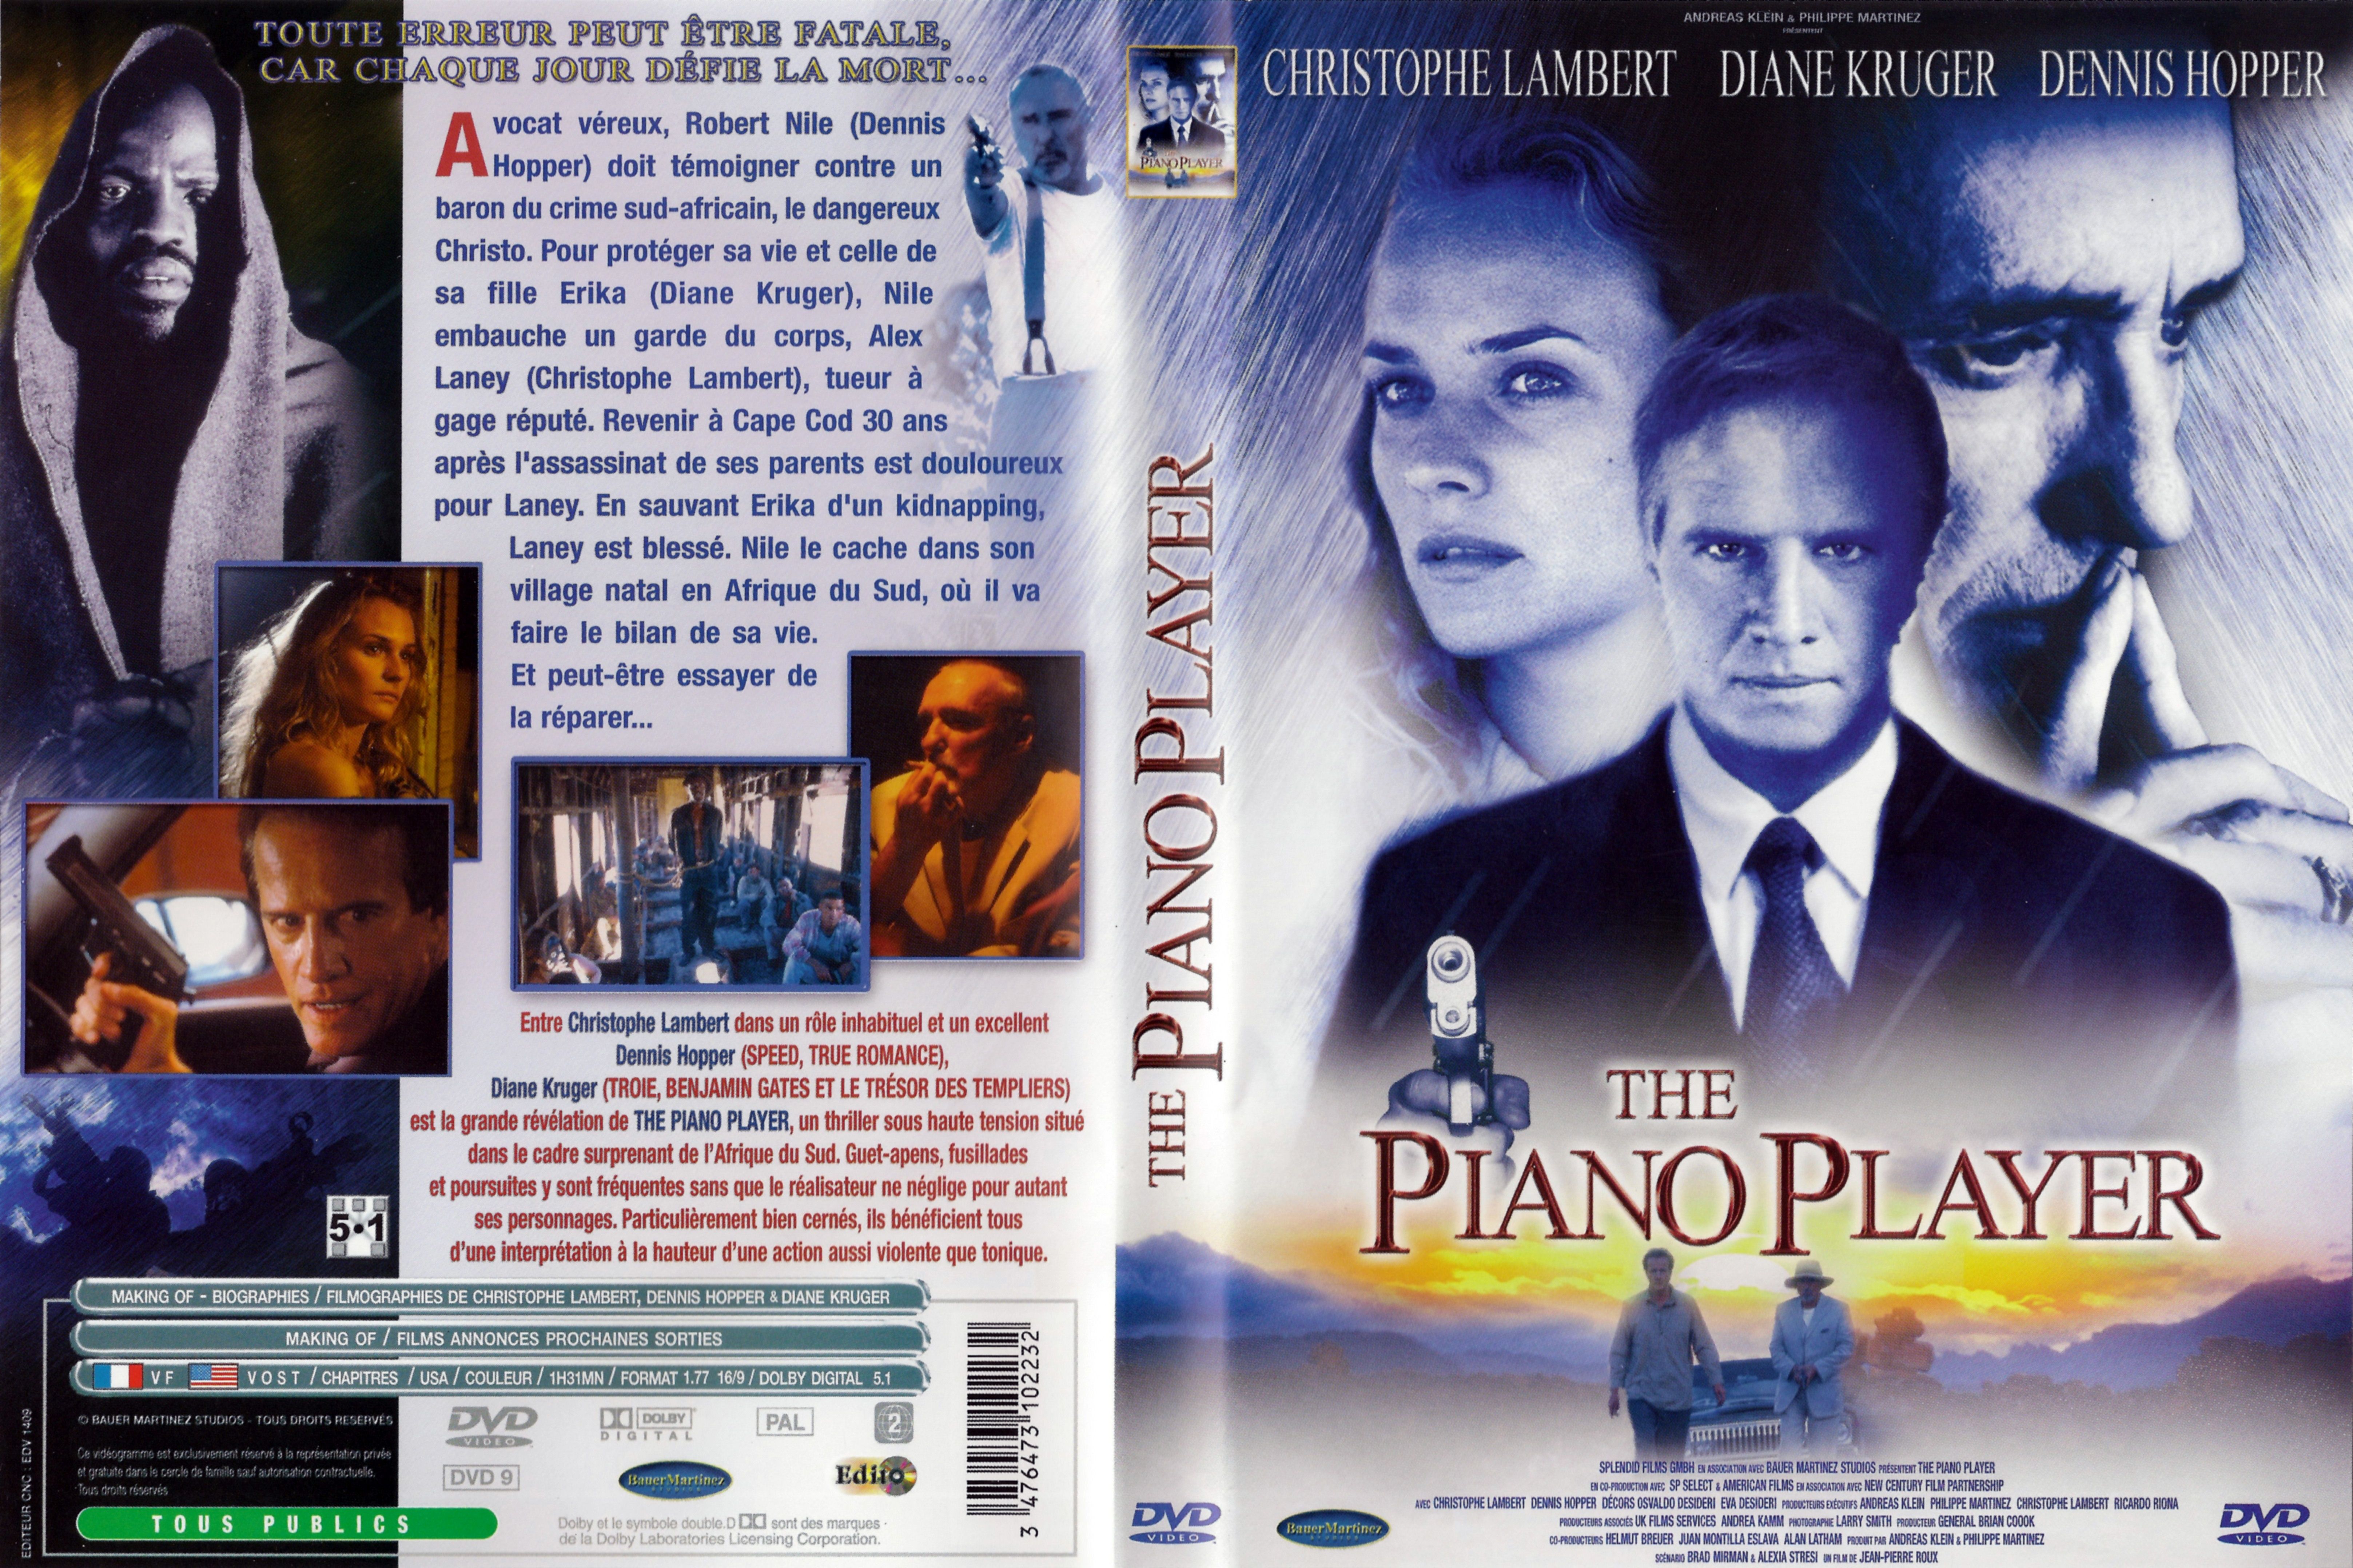 Jaquette DVD The piano player v2